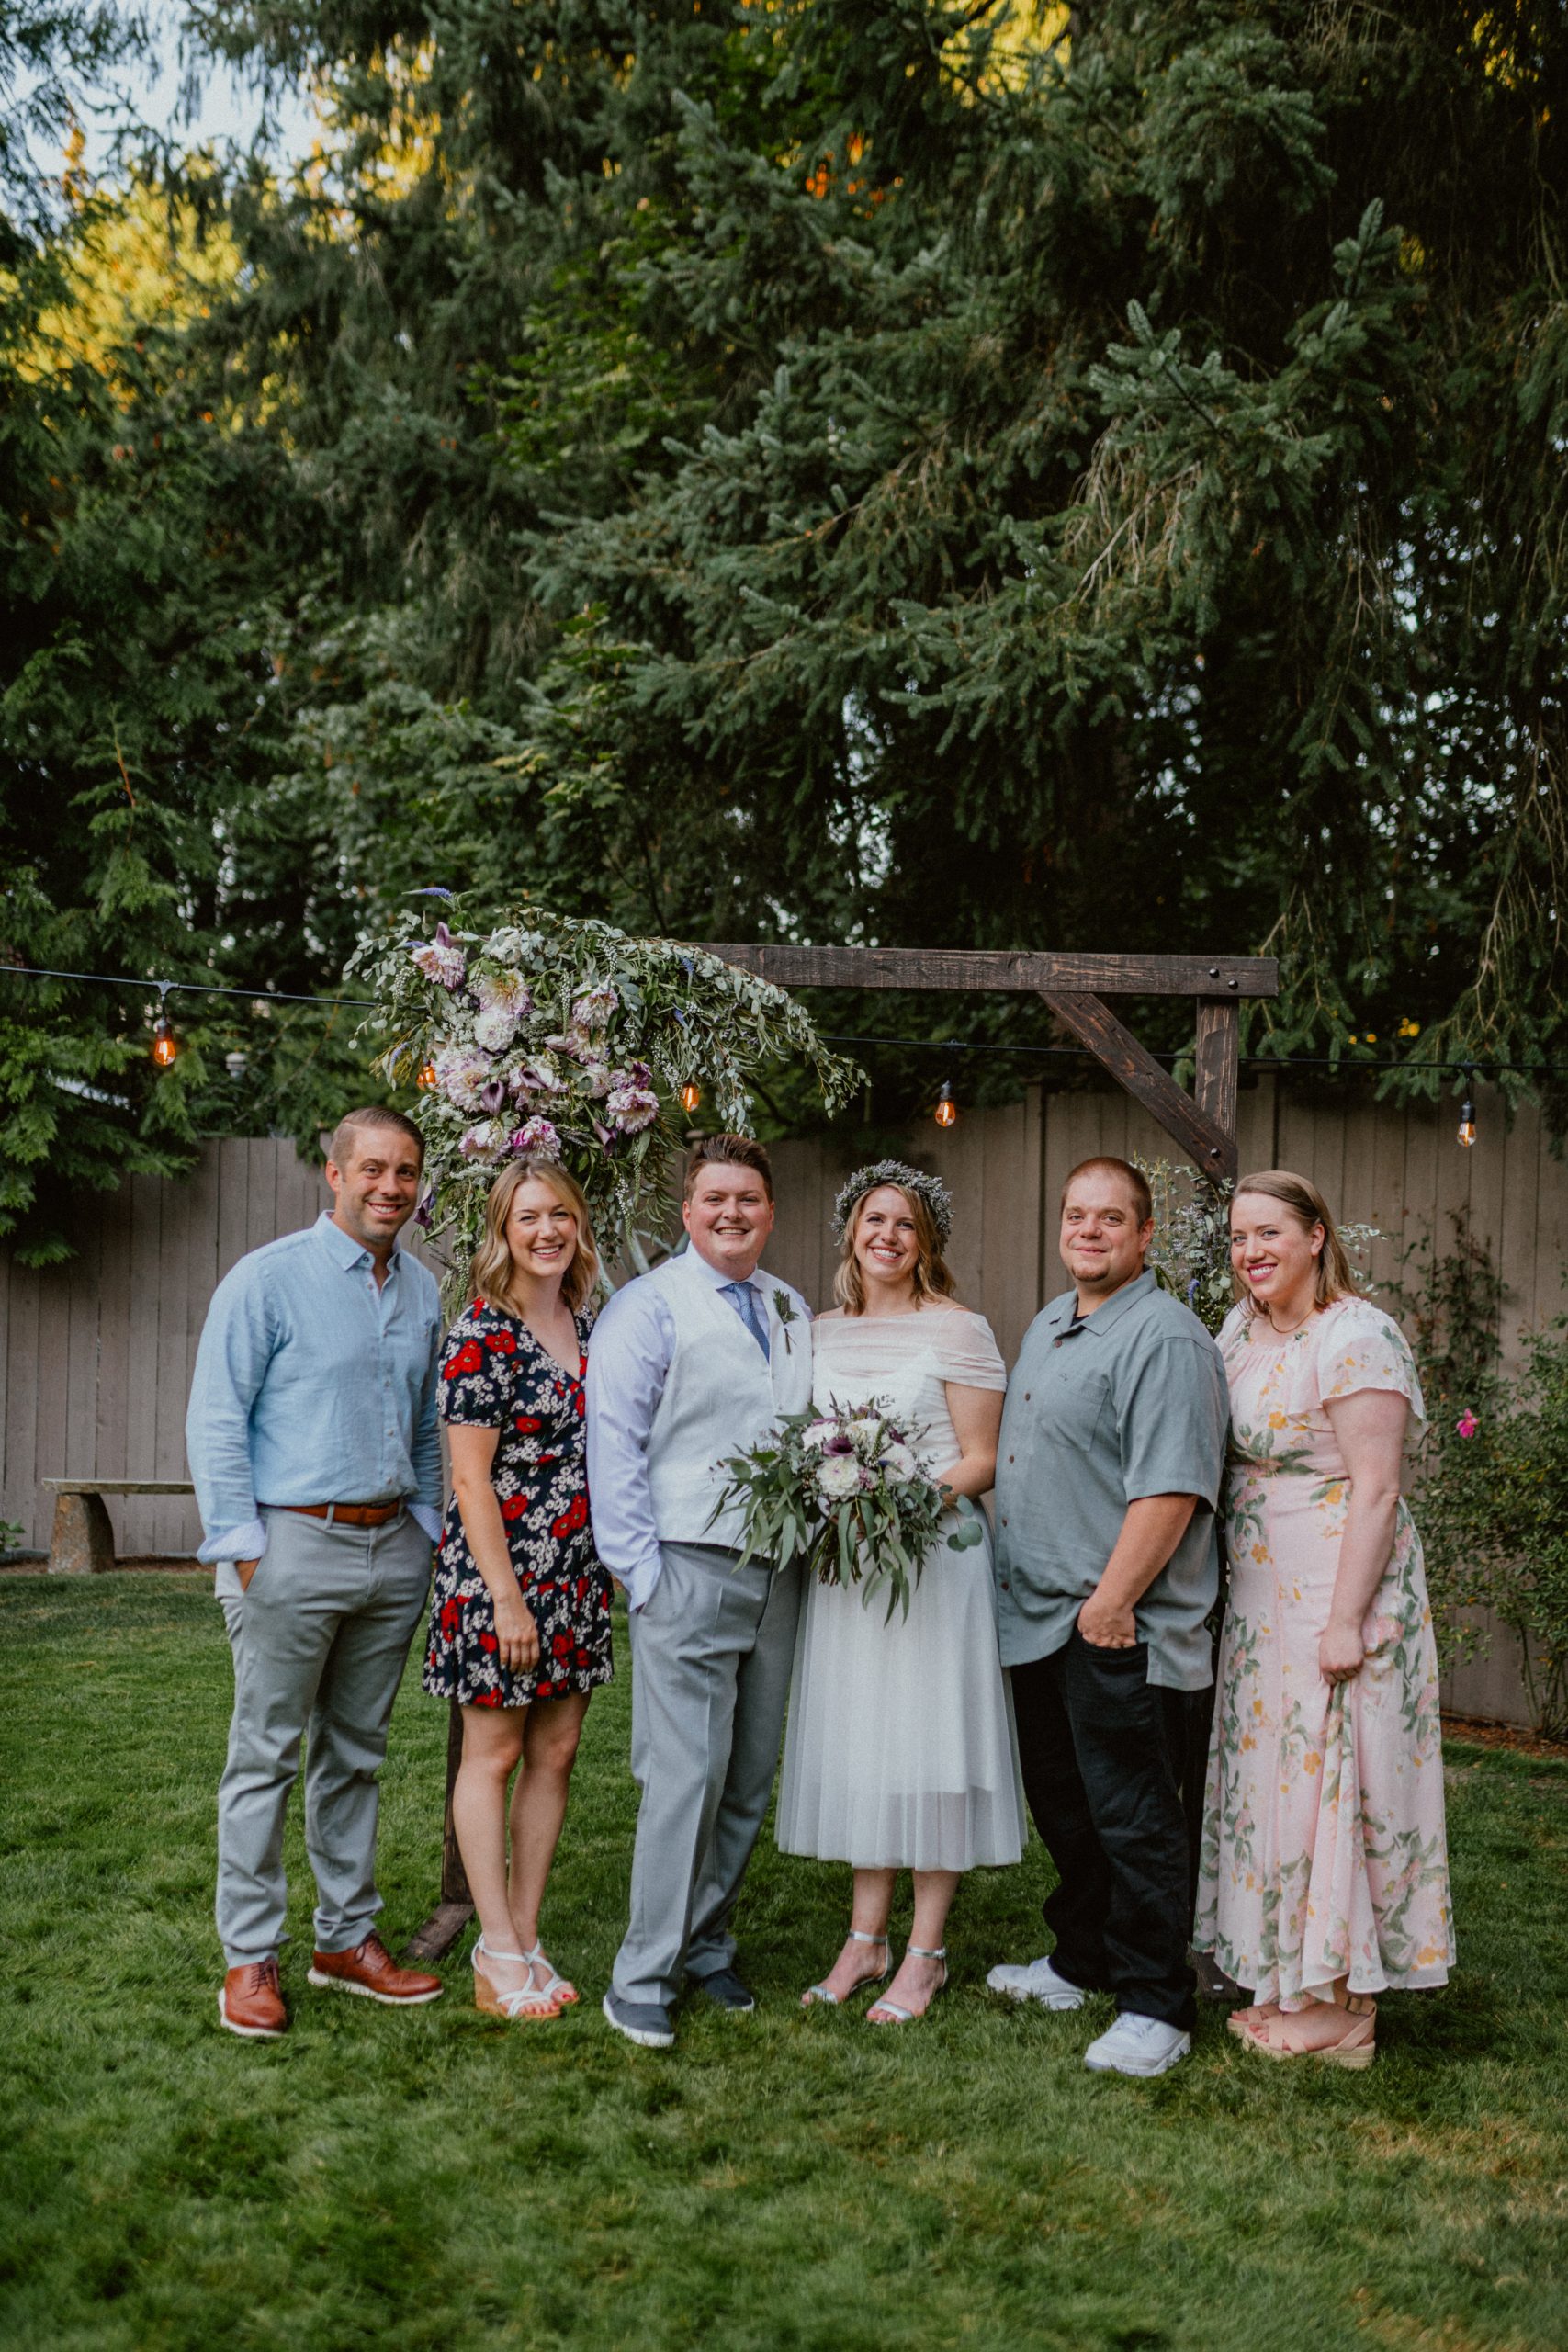 Bride and Groom pose for family photos under DIY flower arch after intimate backyard wedding with family | Seattle Wedding Photographer, Seattle Elopement Photographer | chelseaabril.com